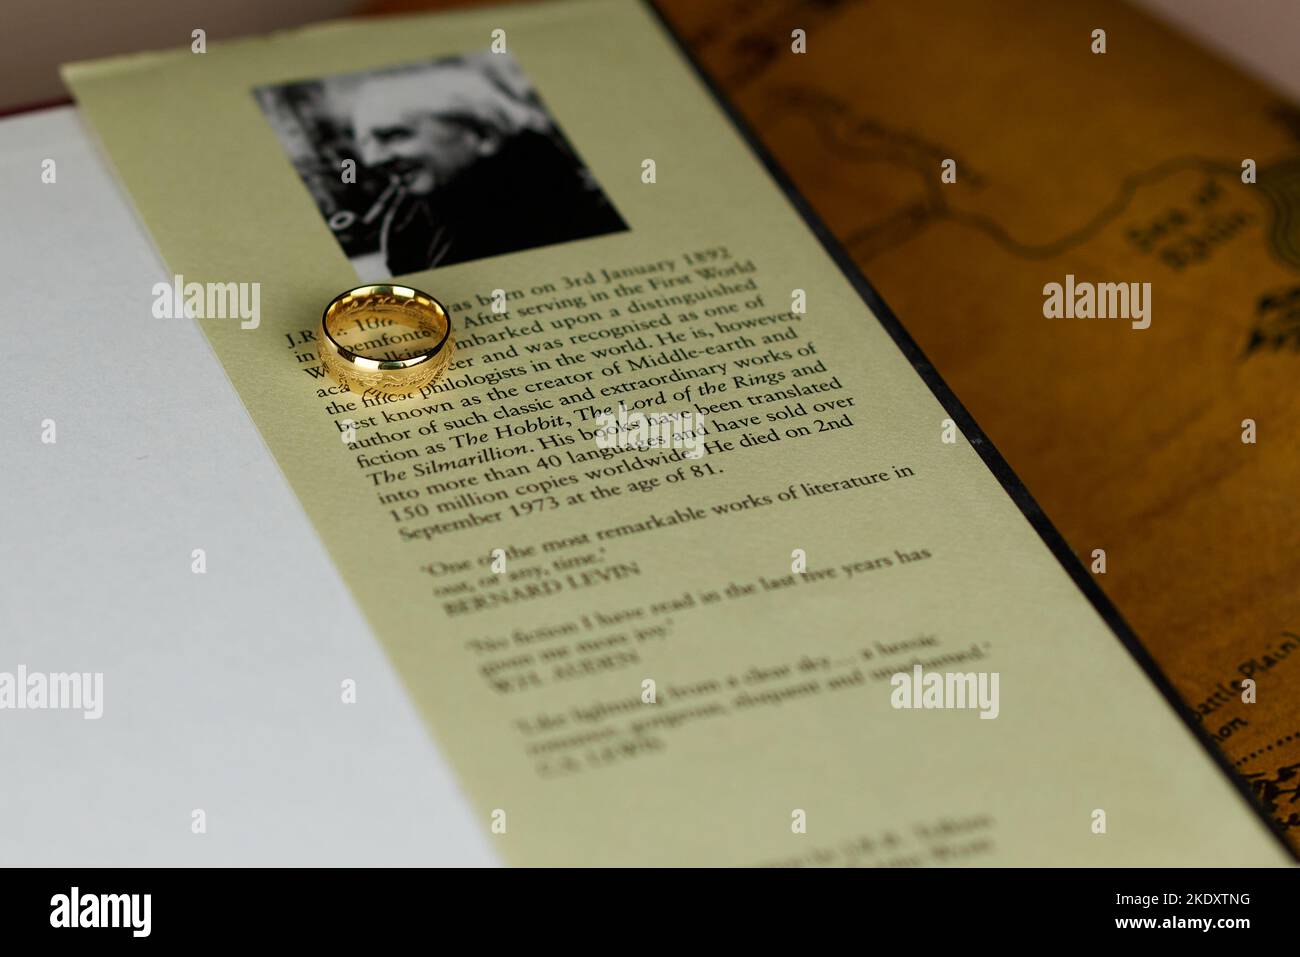 Astrakhan, Russia - 11.09.2022: Golden Ring of Power lies on Tolkien's portrait in the The Lord of the Rings book Stock Photo